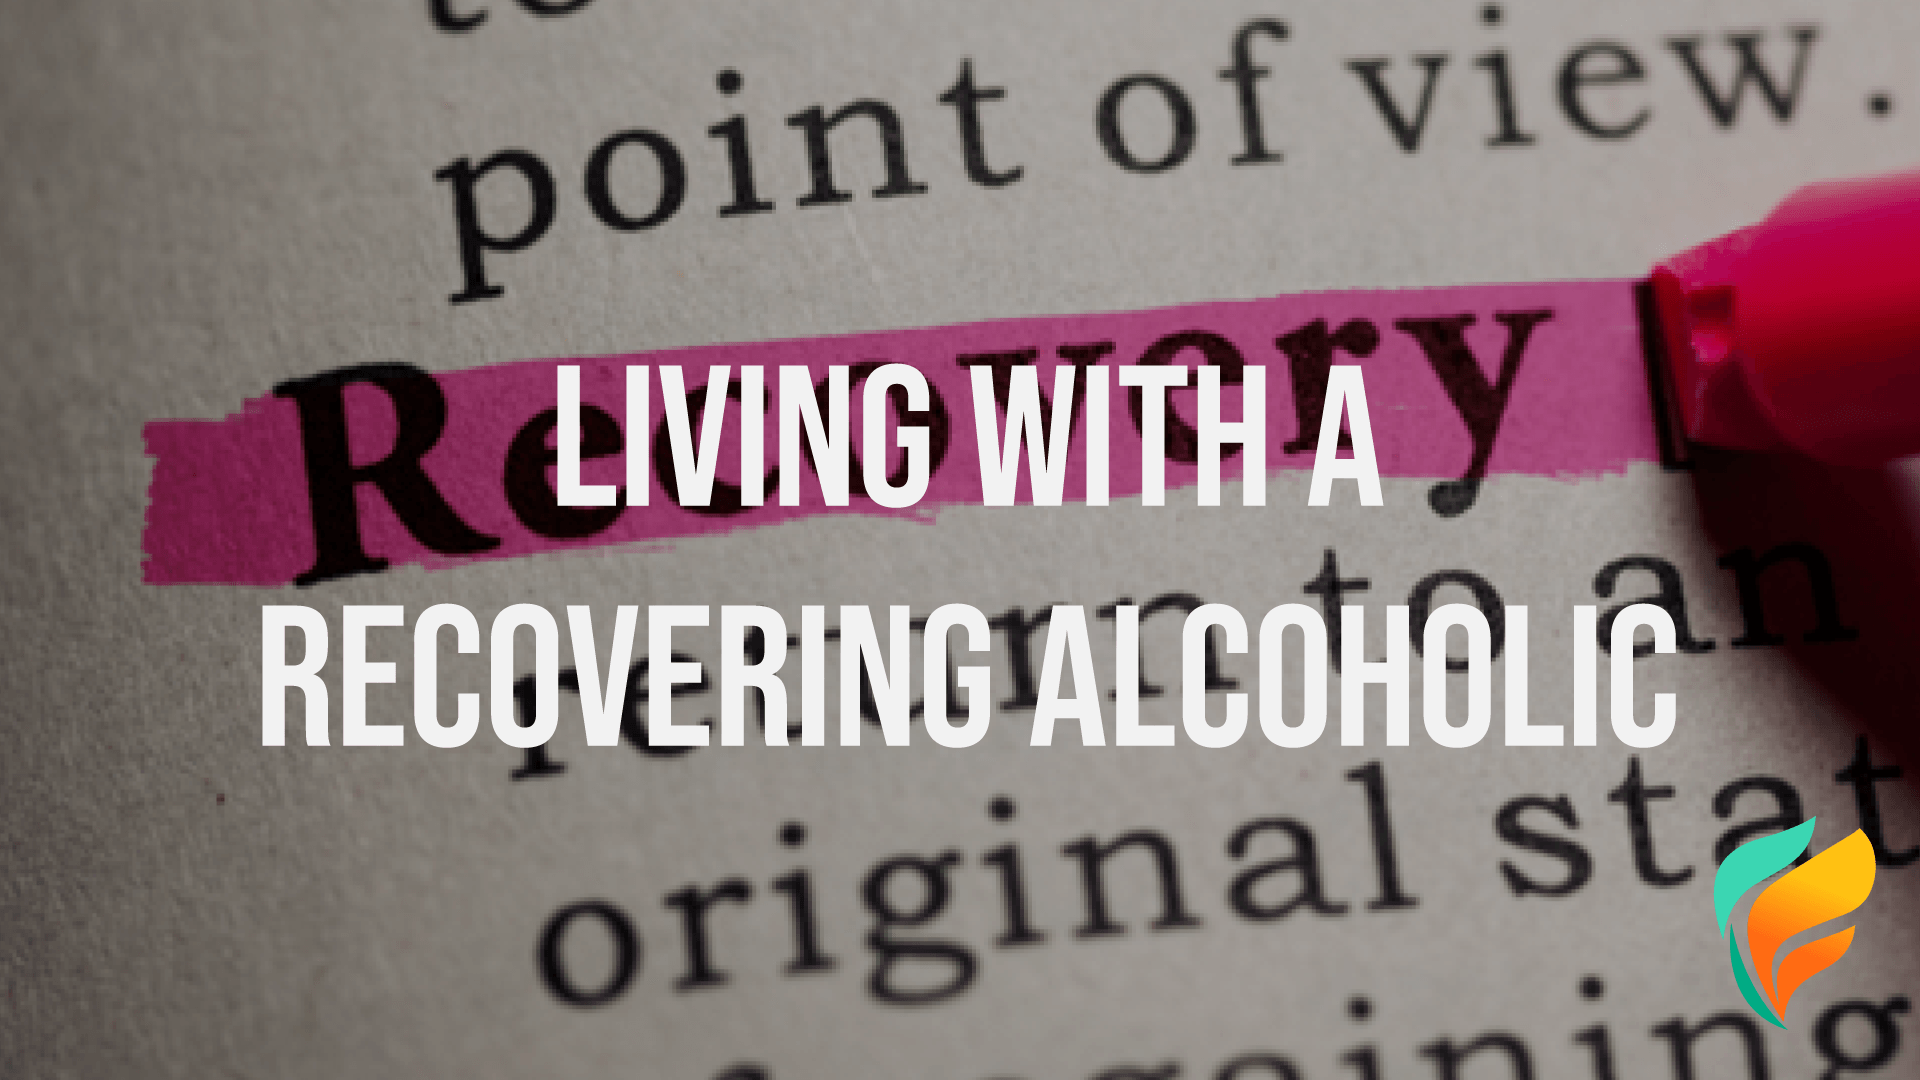 Living With a Recovering Alcoholic